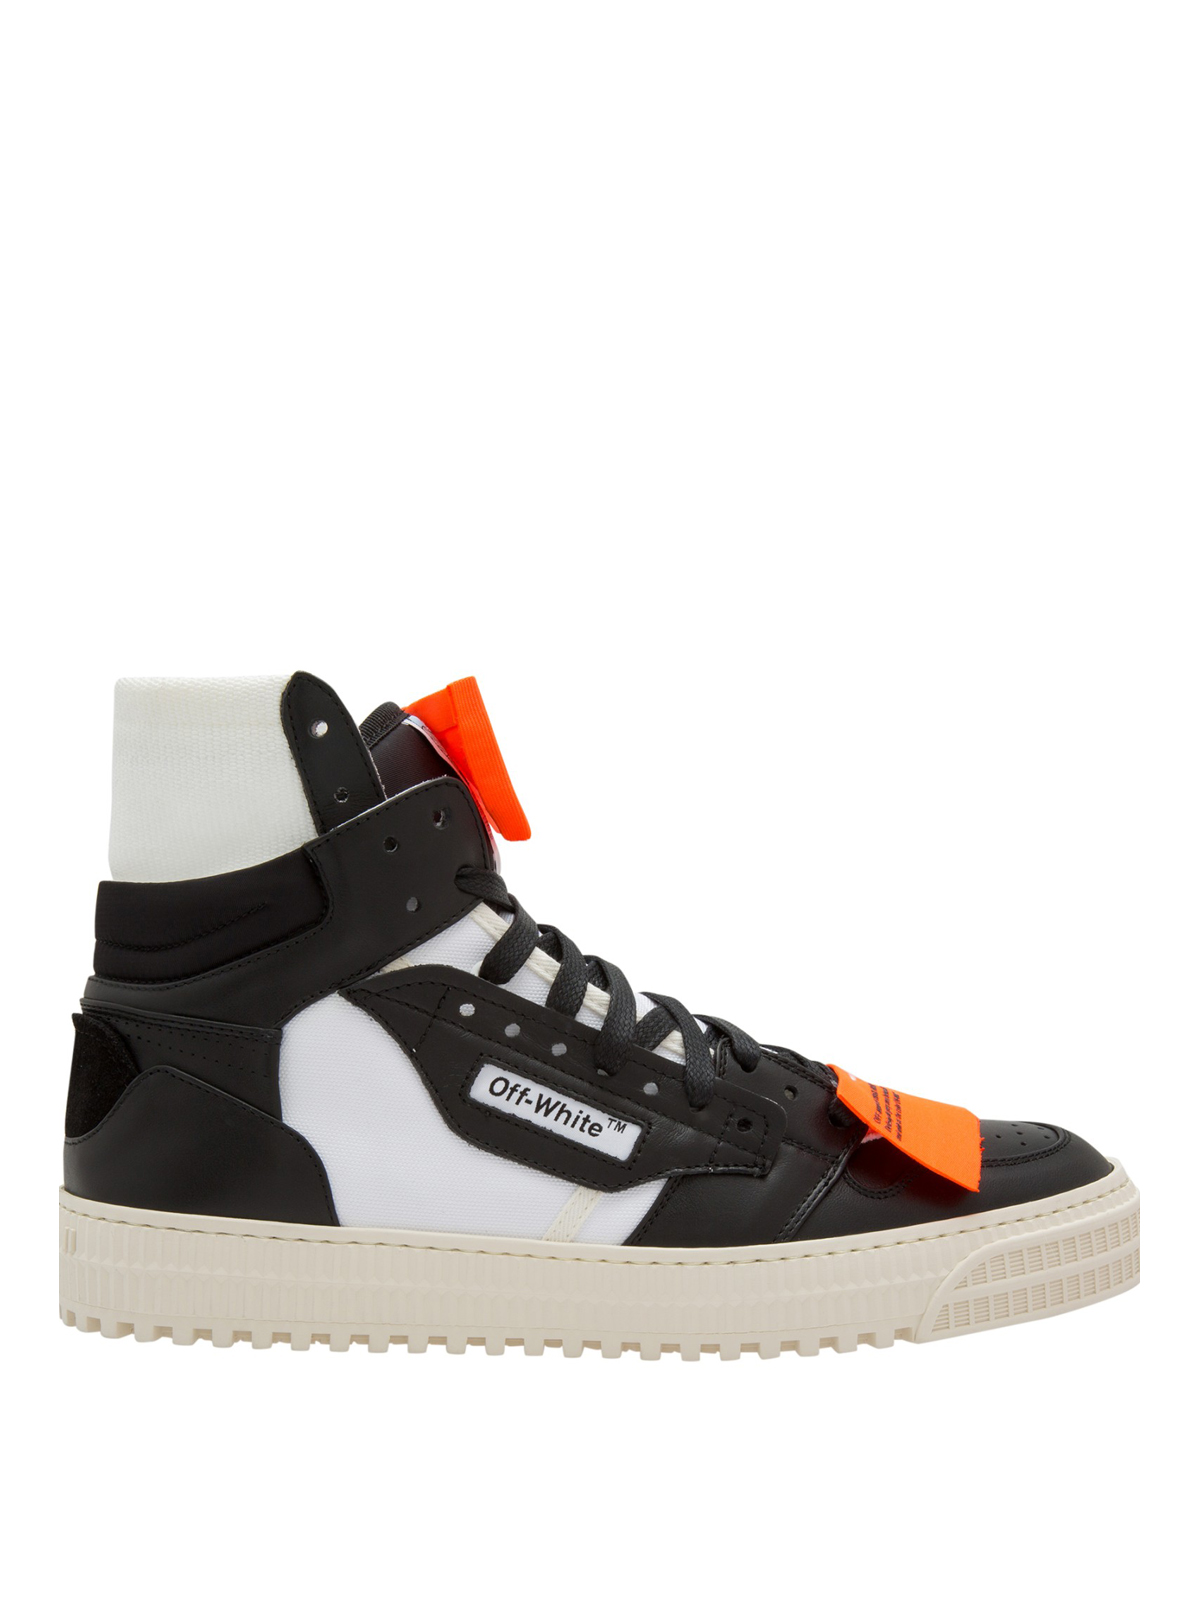 Off-White Low 3.0 Black // Available Now